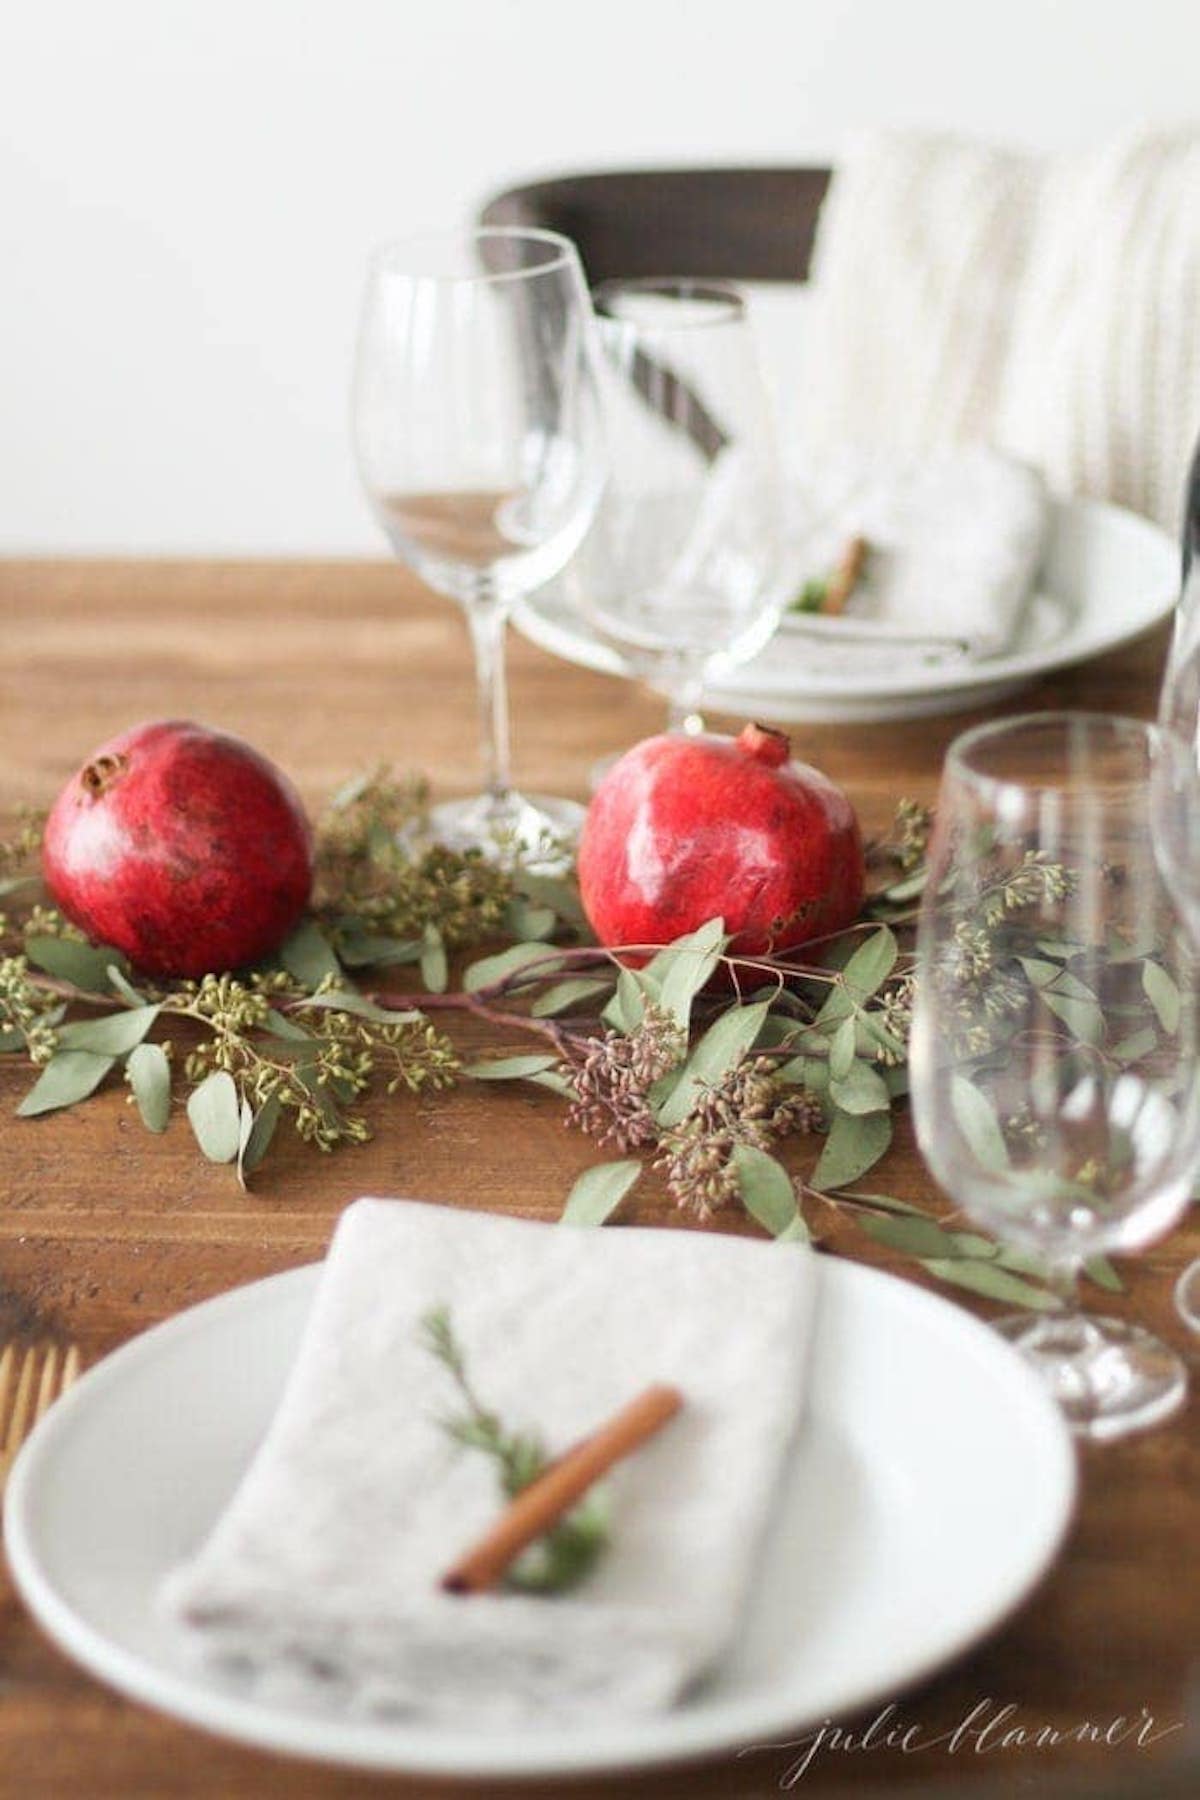 A festive table setting adorned with pomegranates and eucalyptus leaves, featuring a charming Christmas candle centerpiece.